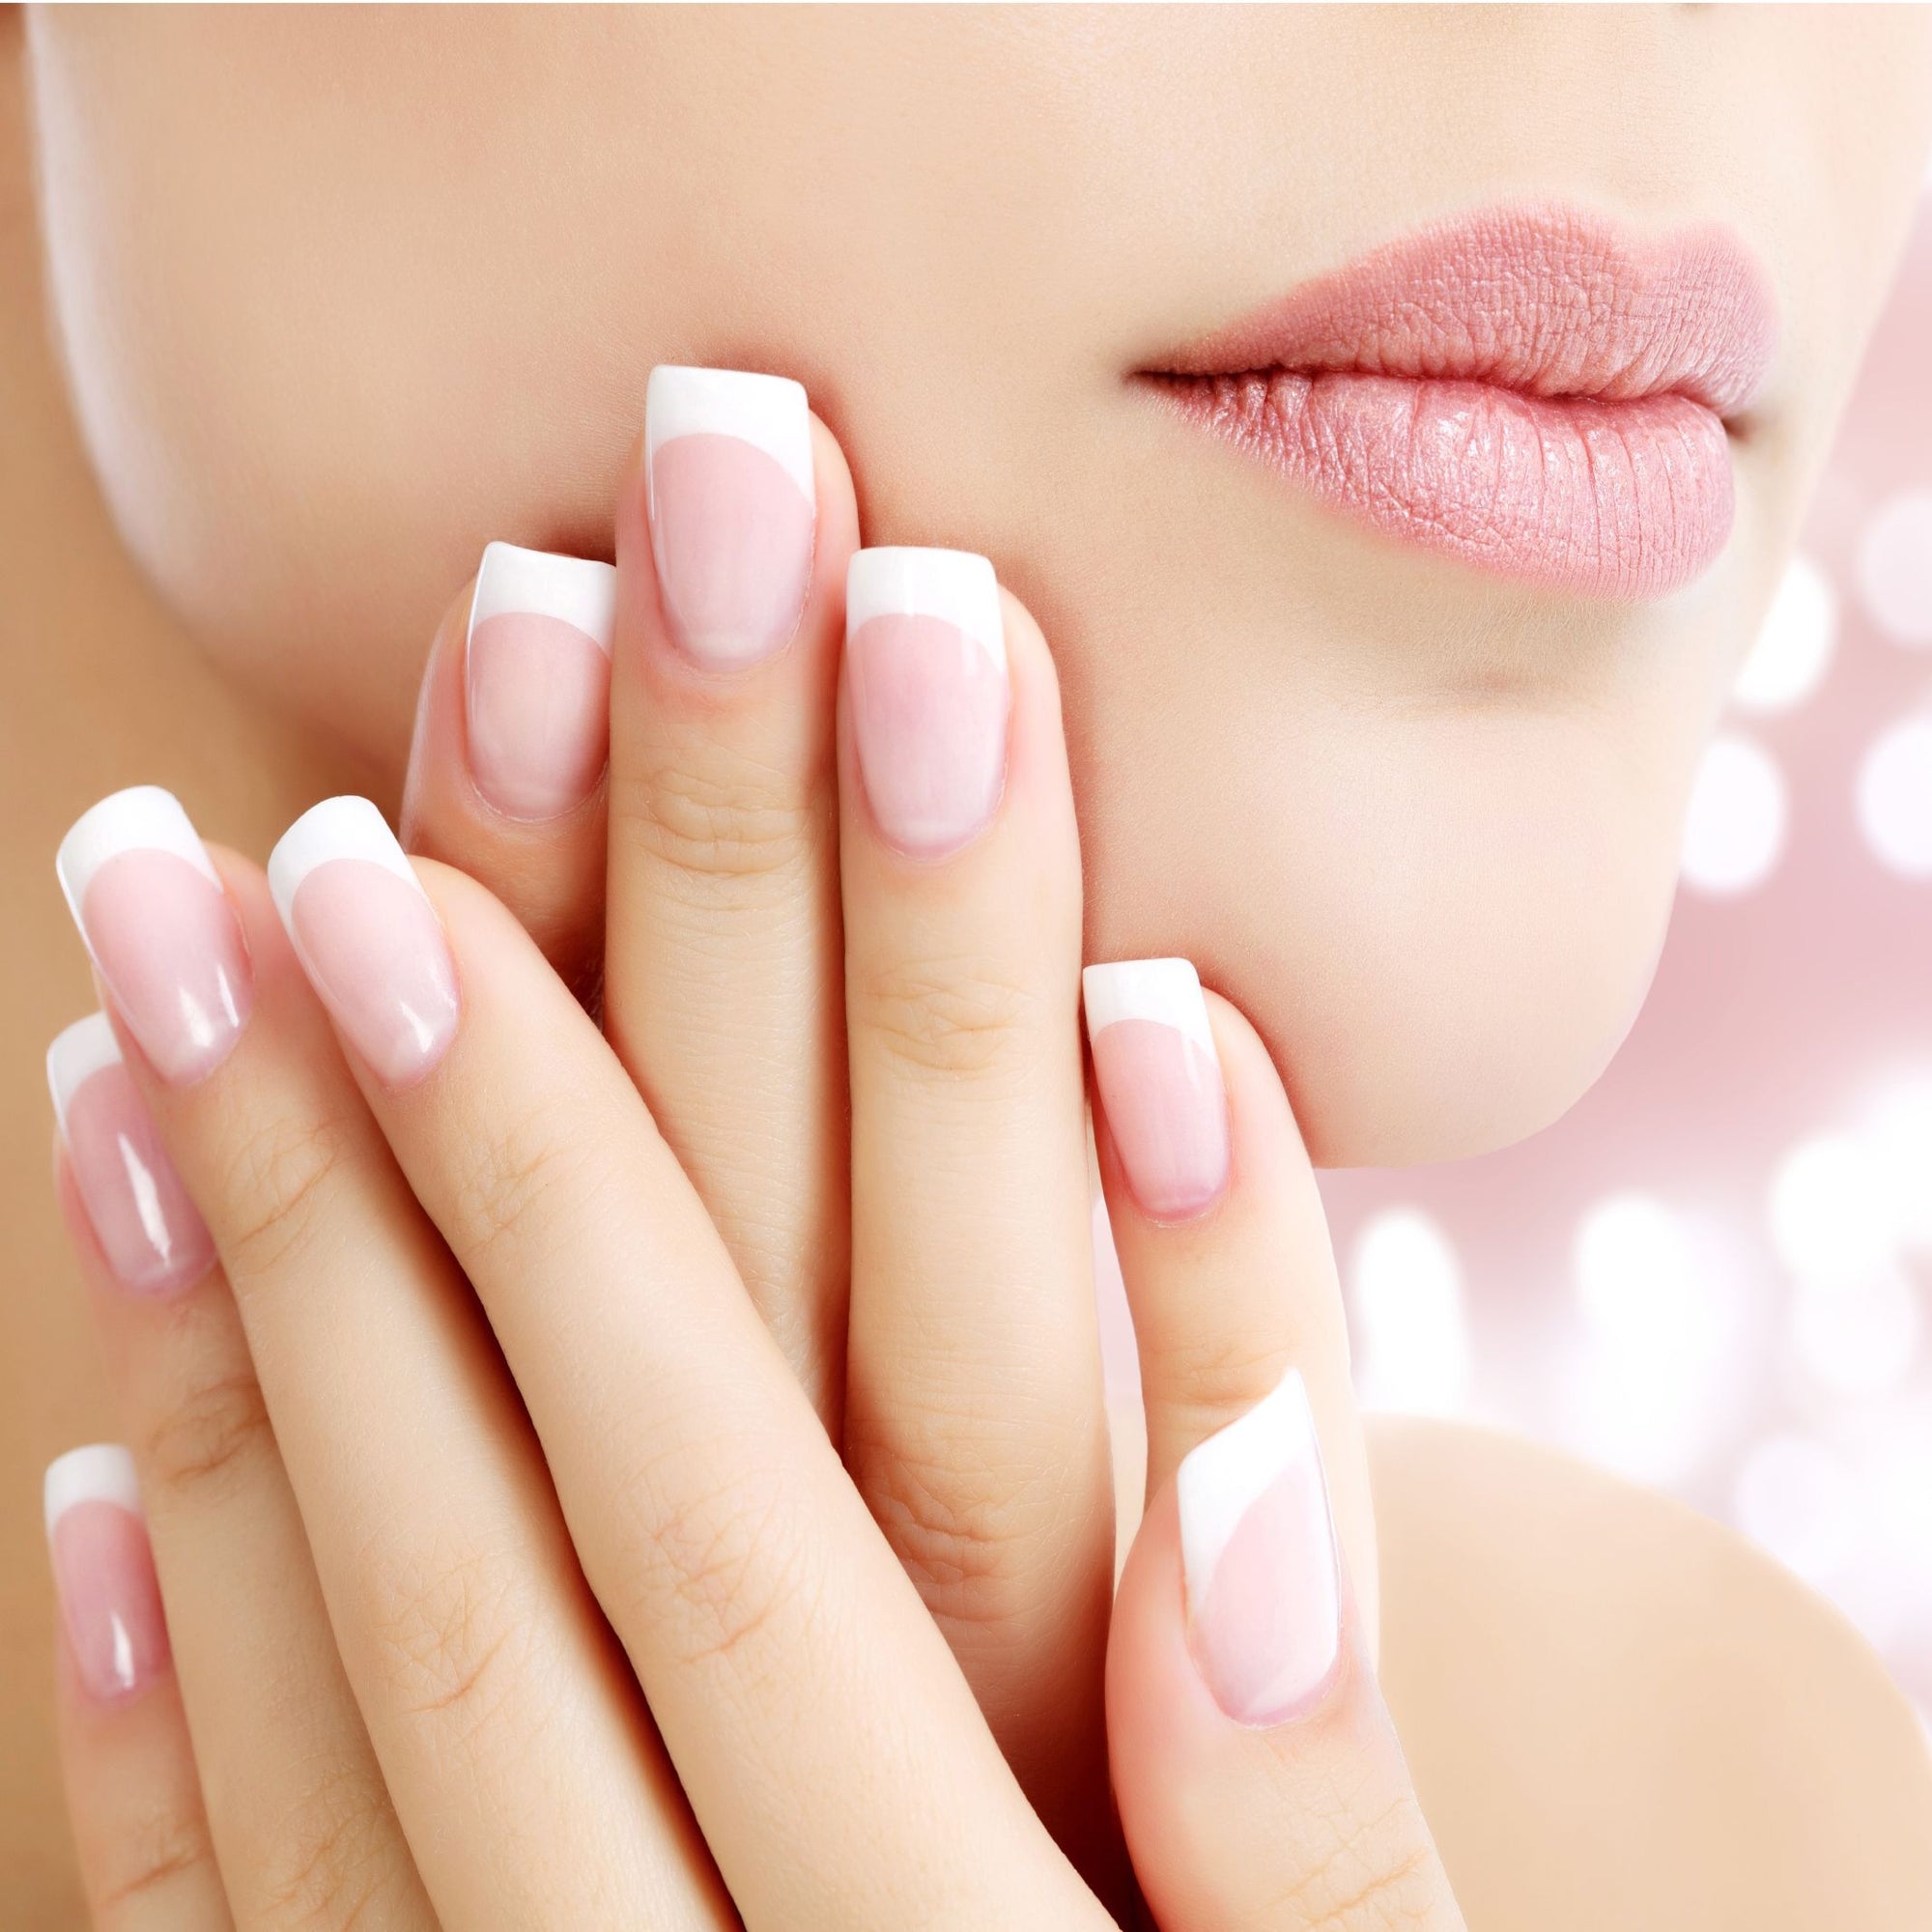 close up of ladies hands on face showing perfect french gel manicure nails 